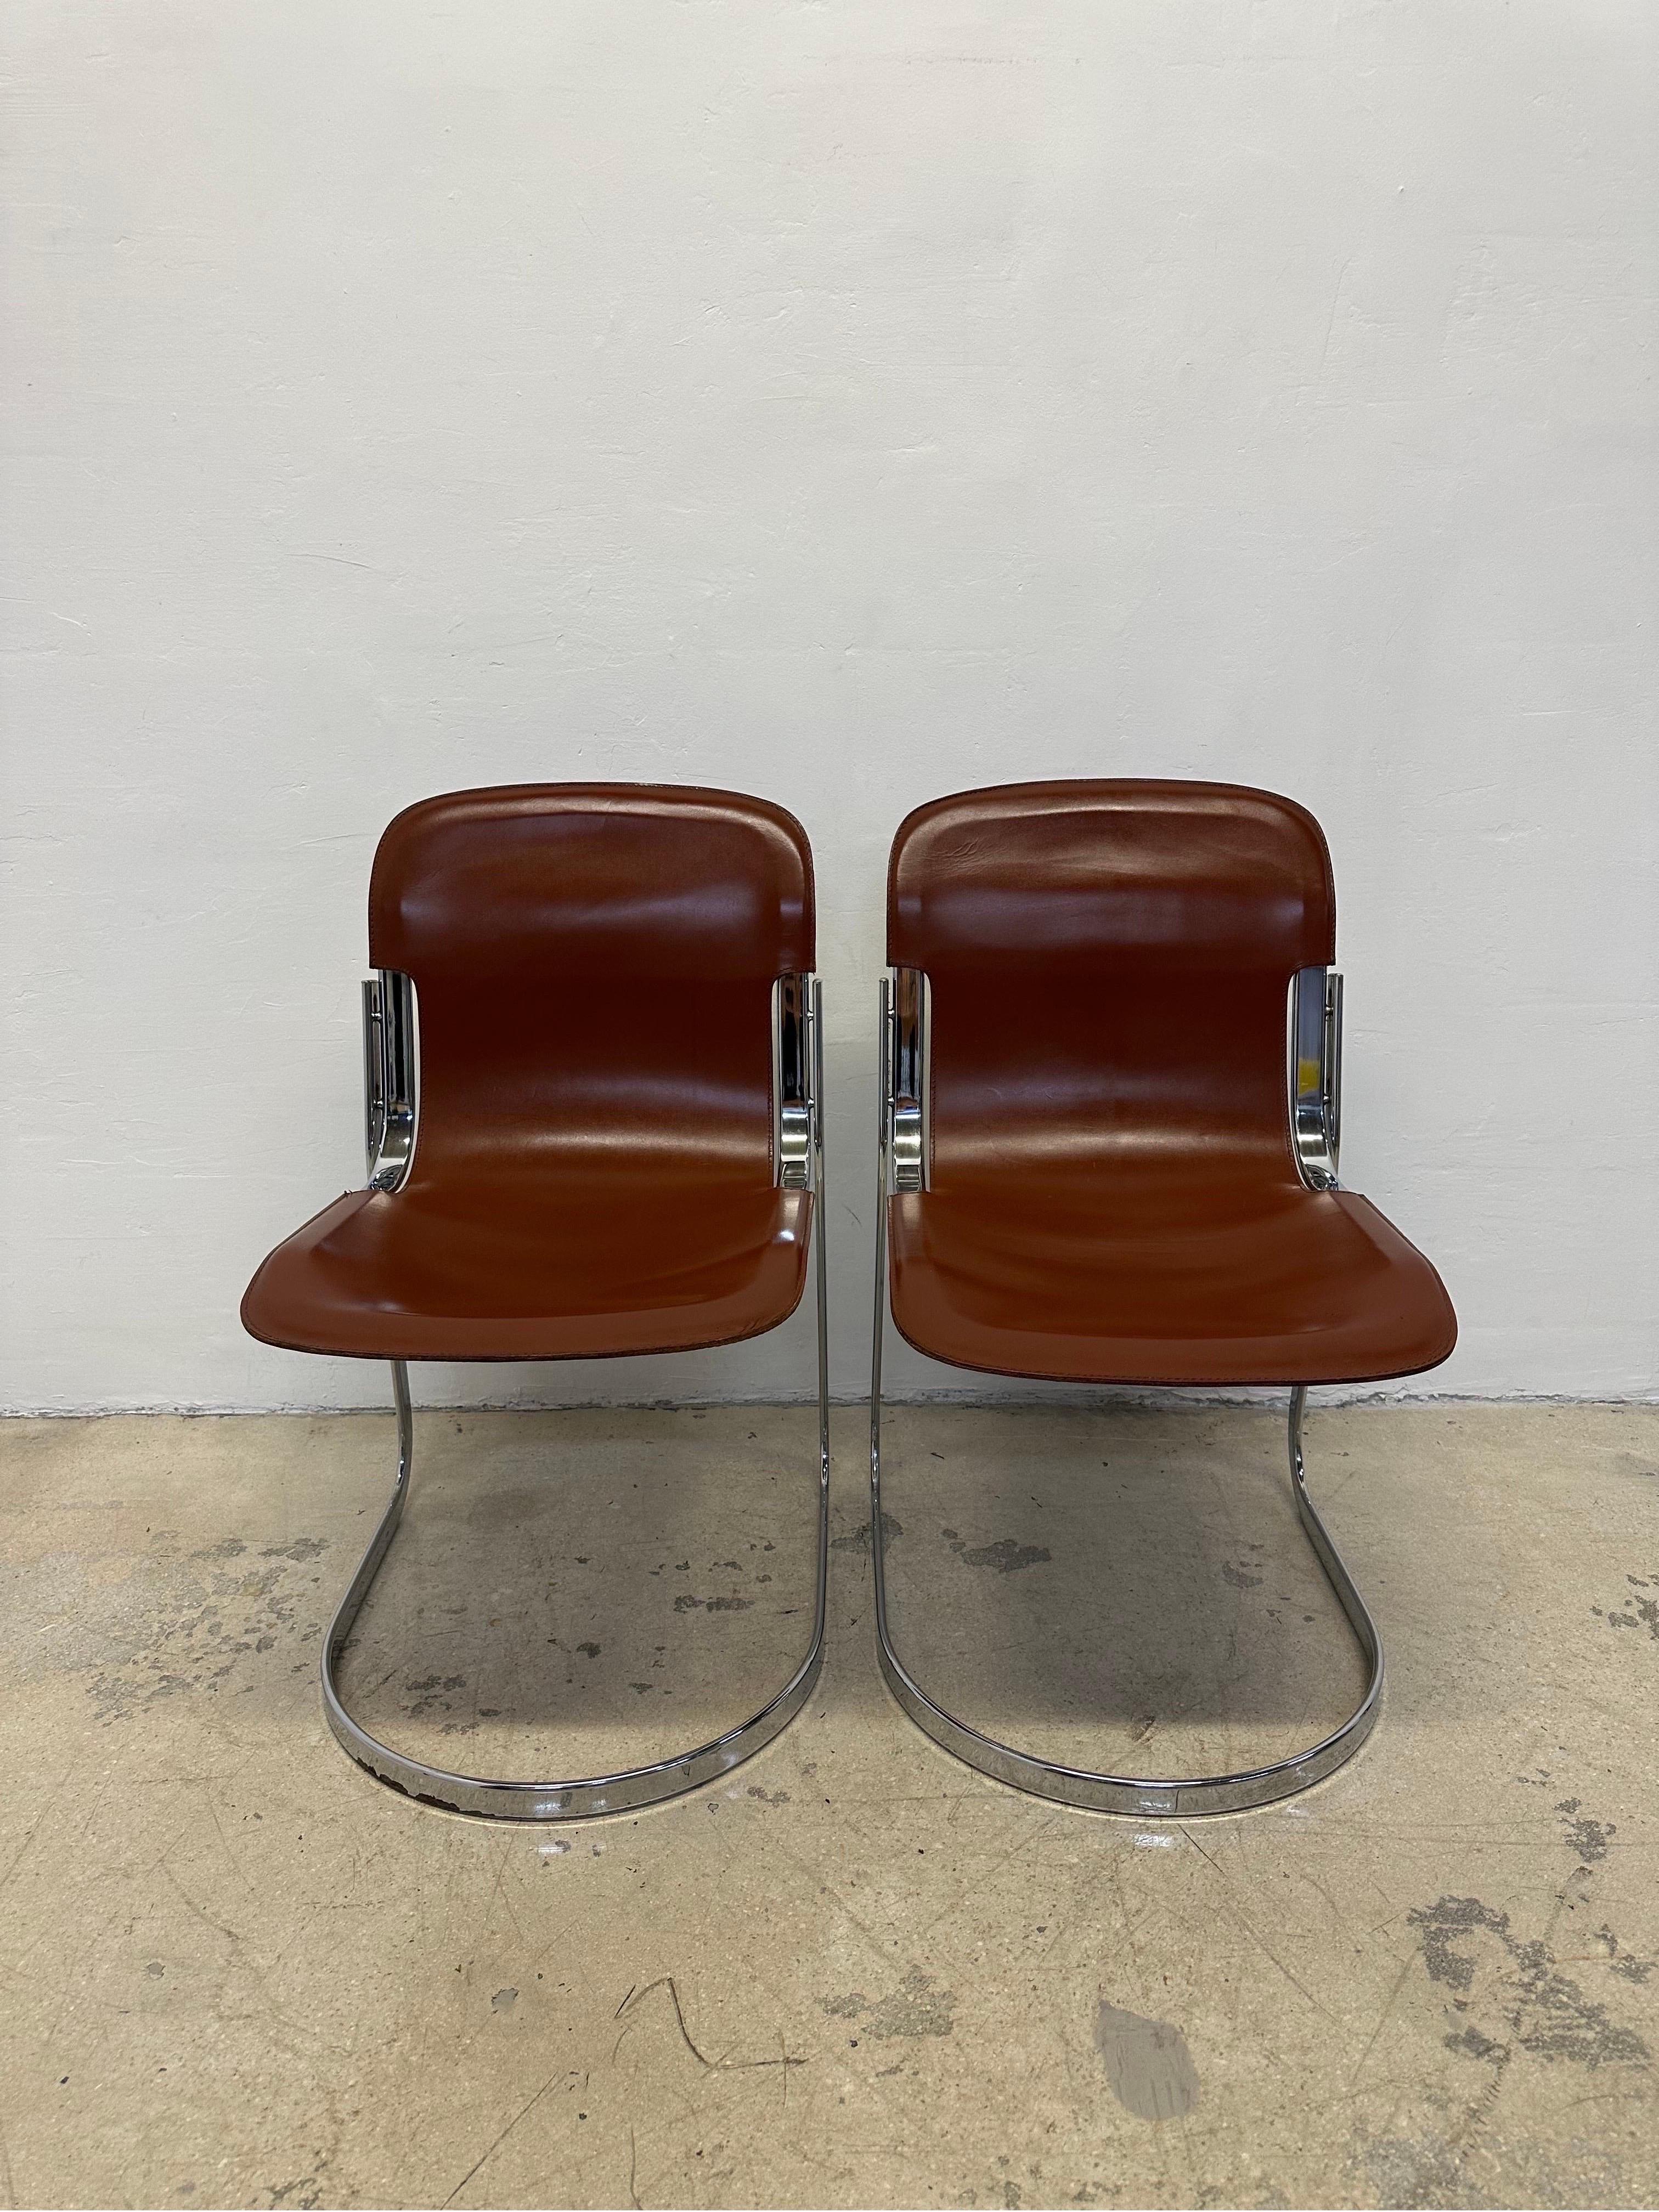 C2 leather and chrome cantilevered dining or side chairs designed by Willy Rizzo for Cidue, Italy 1970s.

Priced individually 